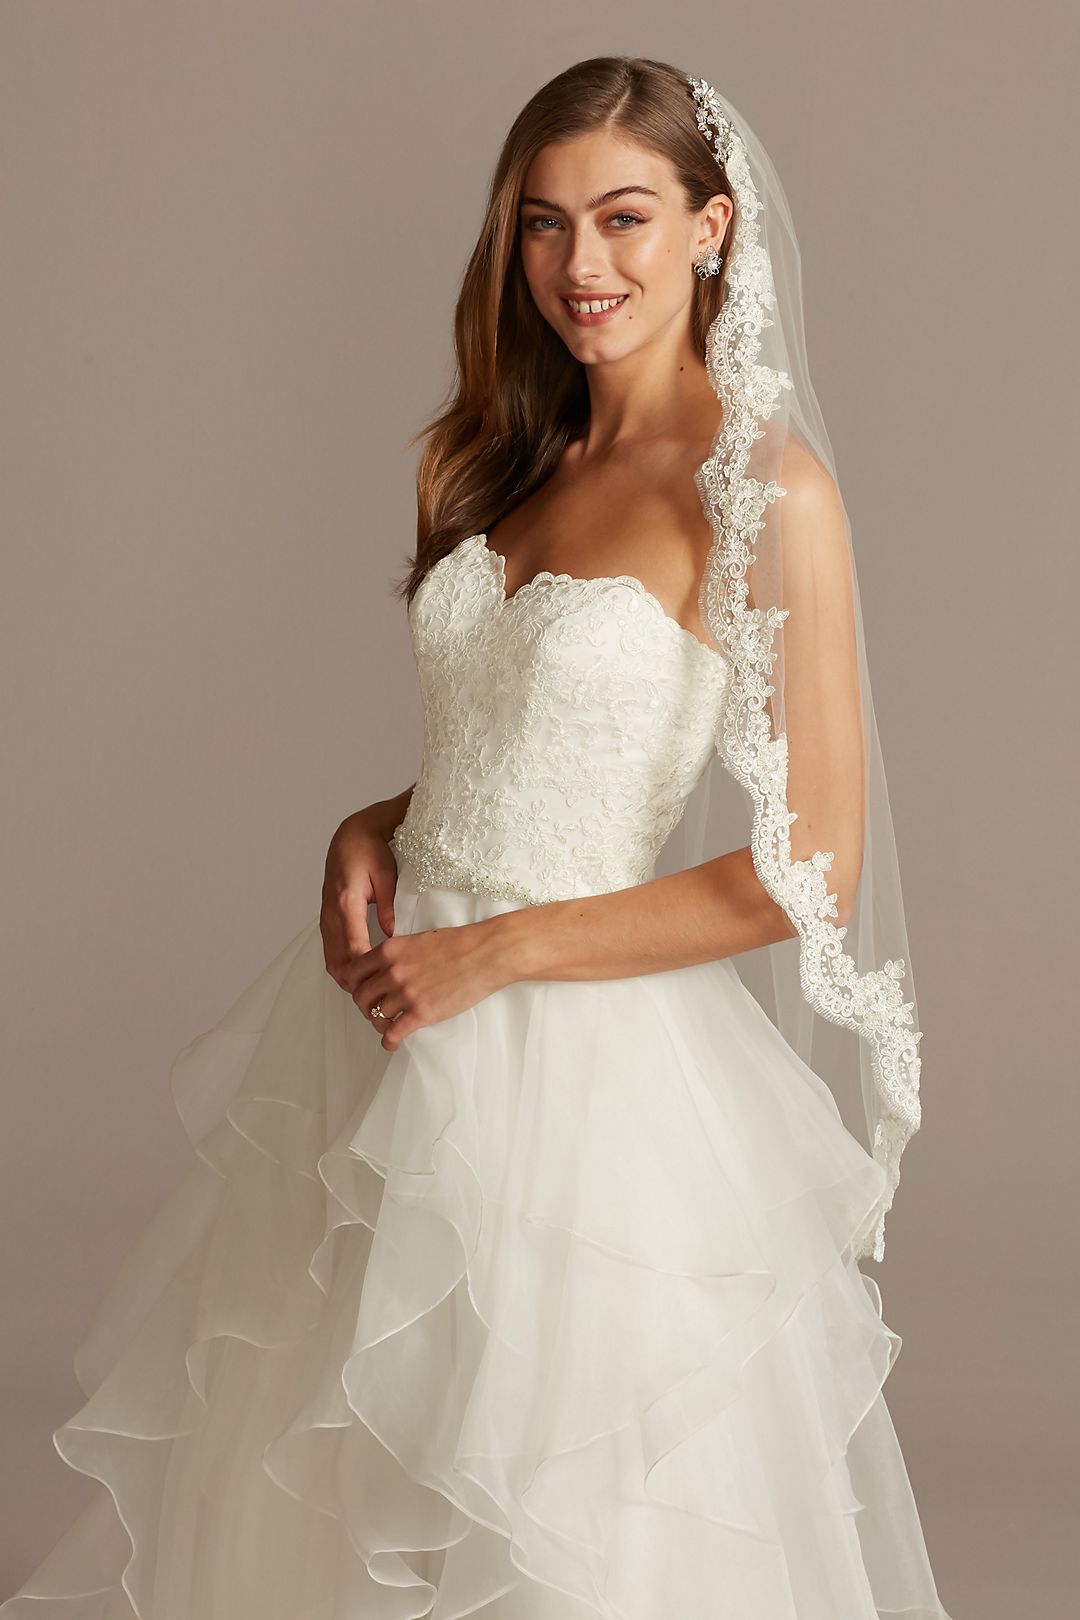 Tulle Fingertip Veil with Scalloped Lace Edge Image 1